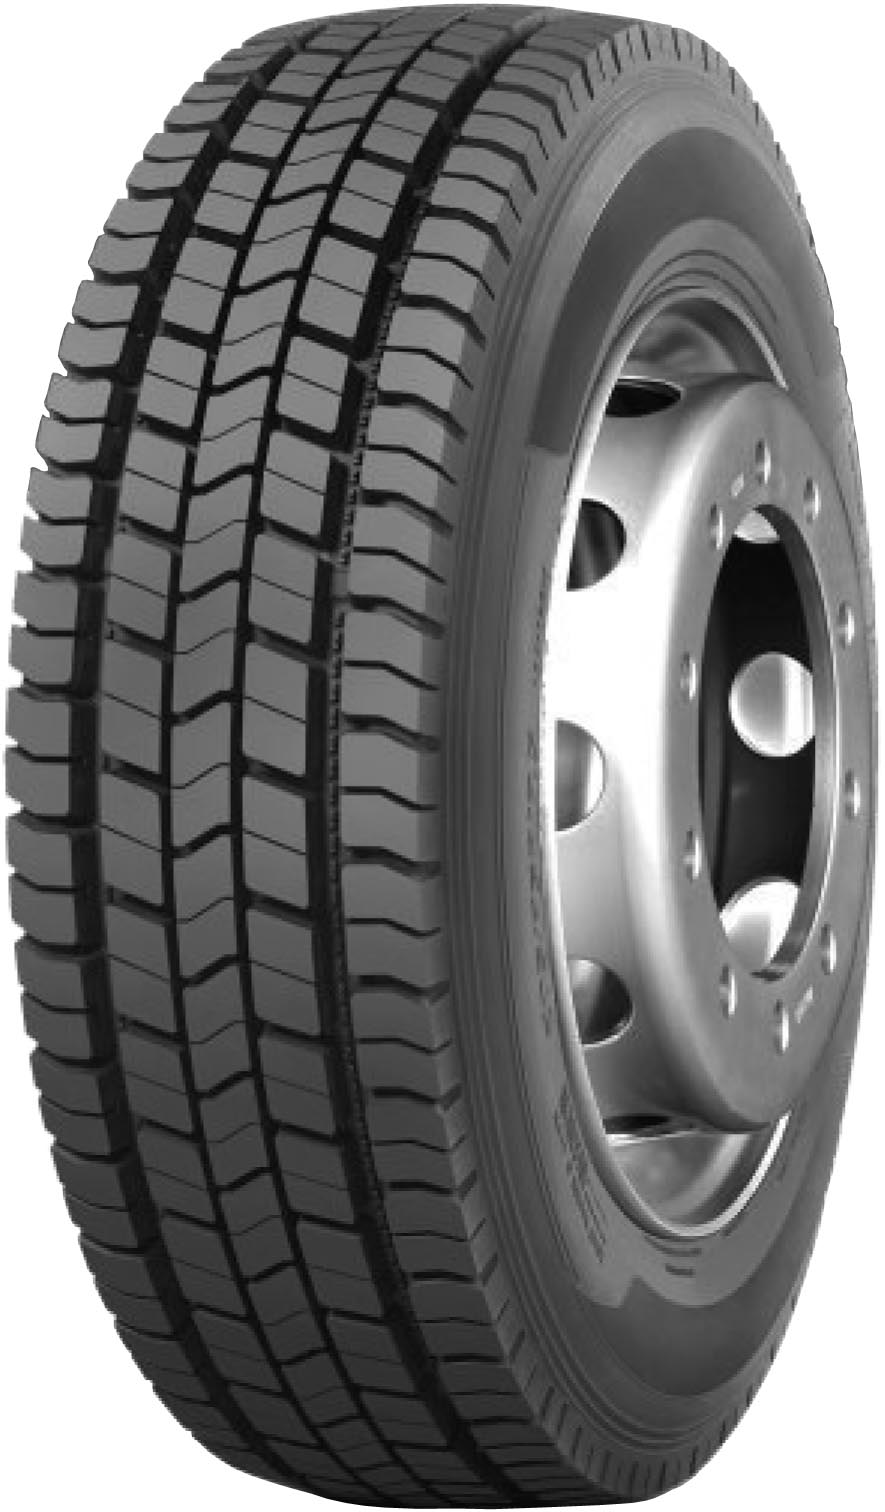 product_type-heavy_tires TRAZANO TDR+1 16 TL 265/70 R19.5 140M